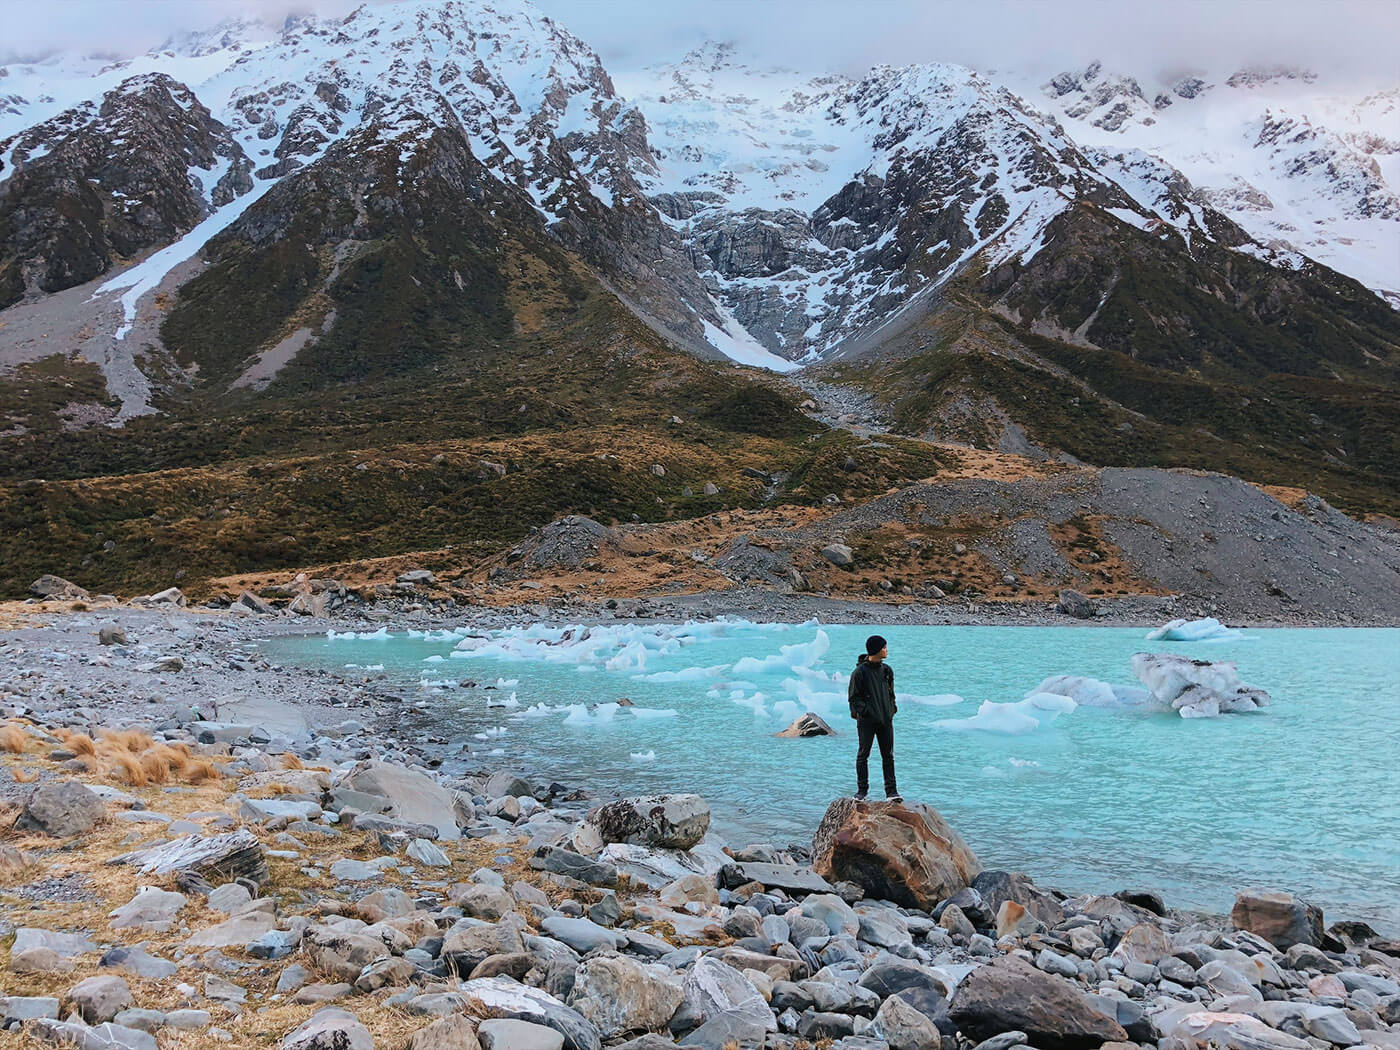 Hooker Lake at the end of the Hooker Valley Track